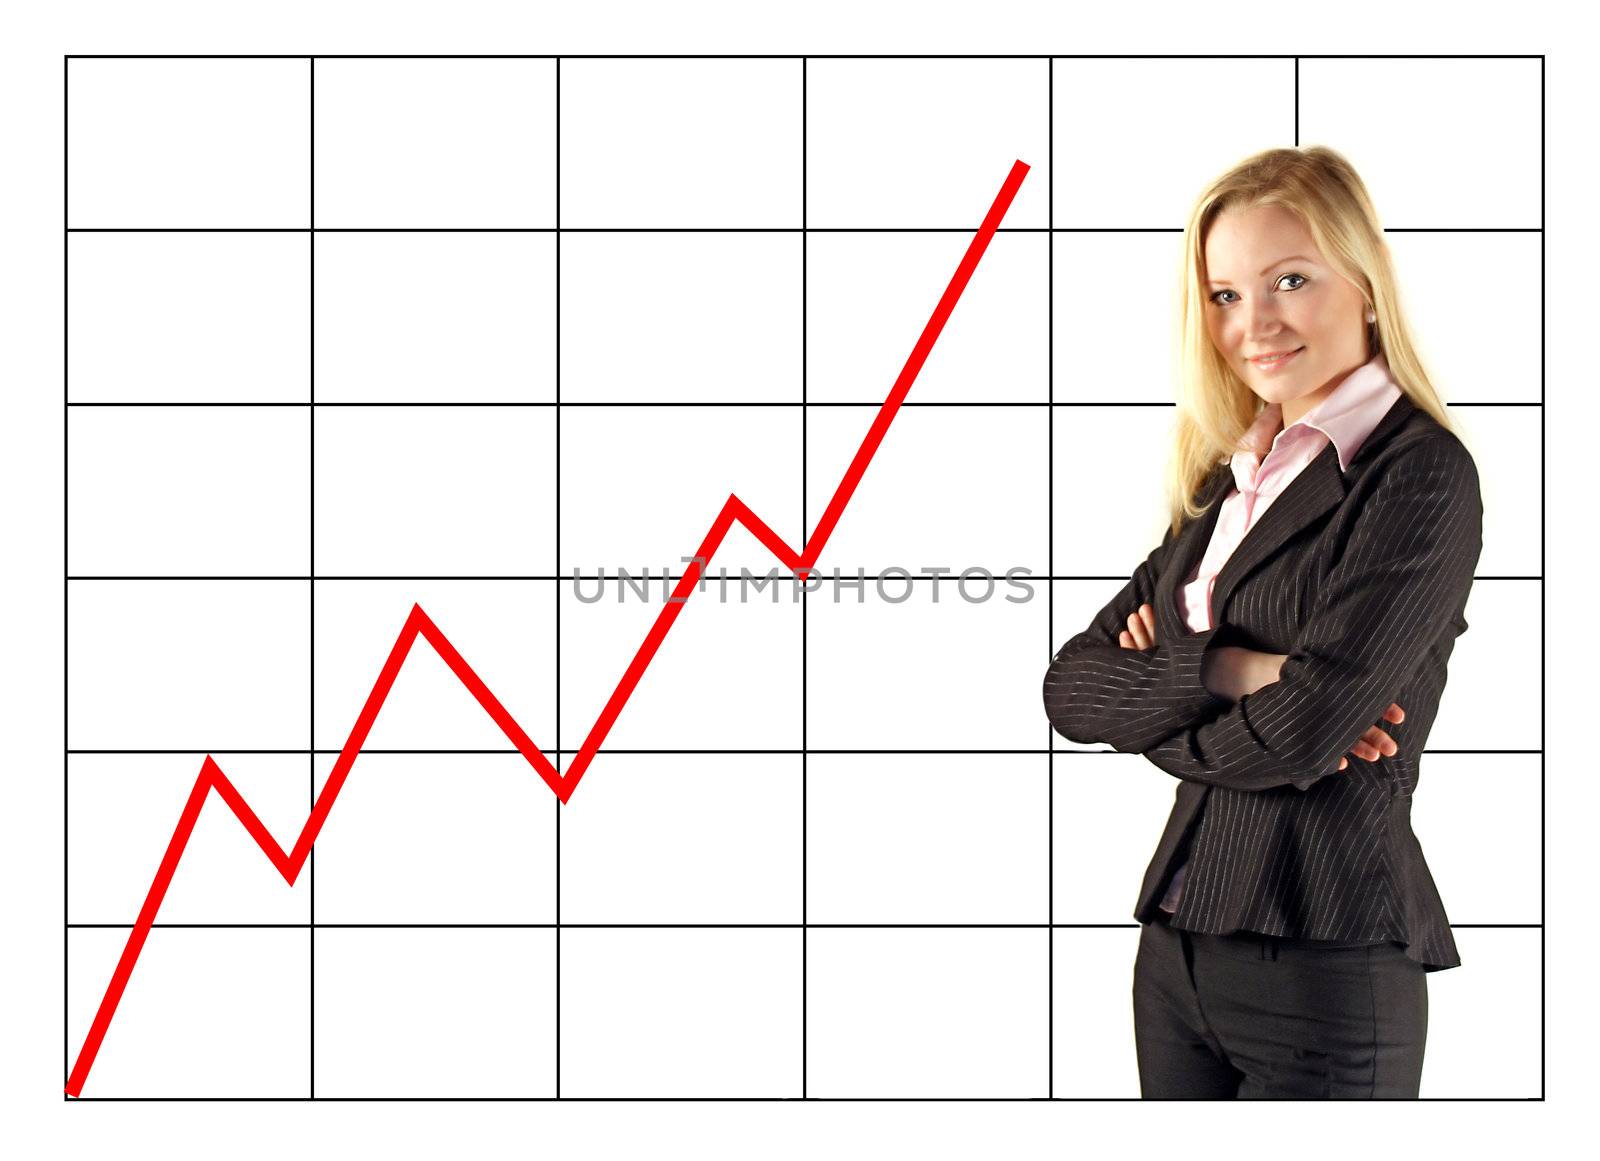 A young beautiful businesswoman next to a positive chart
** Note: Slight blurriness, best at smaller sizes.